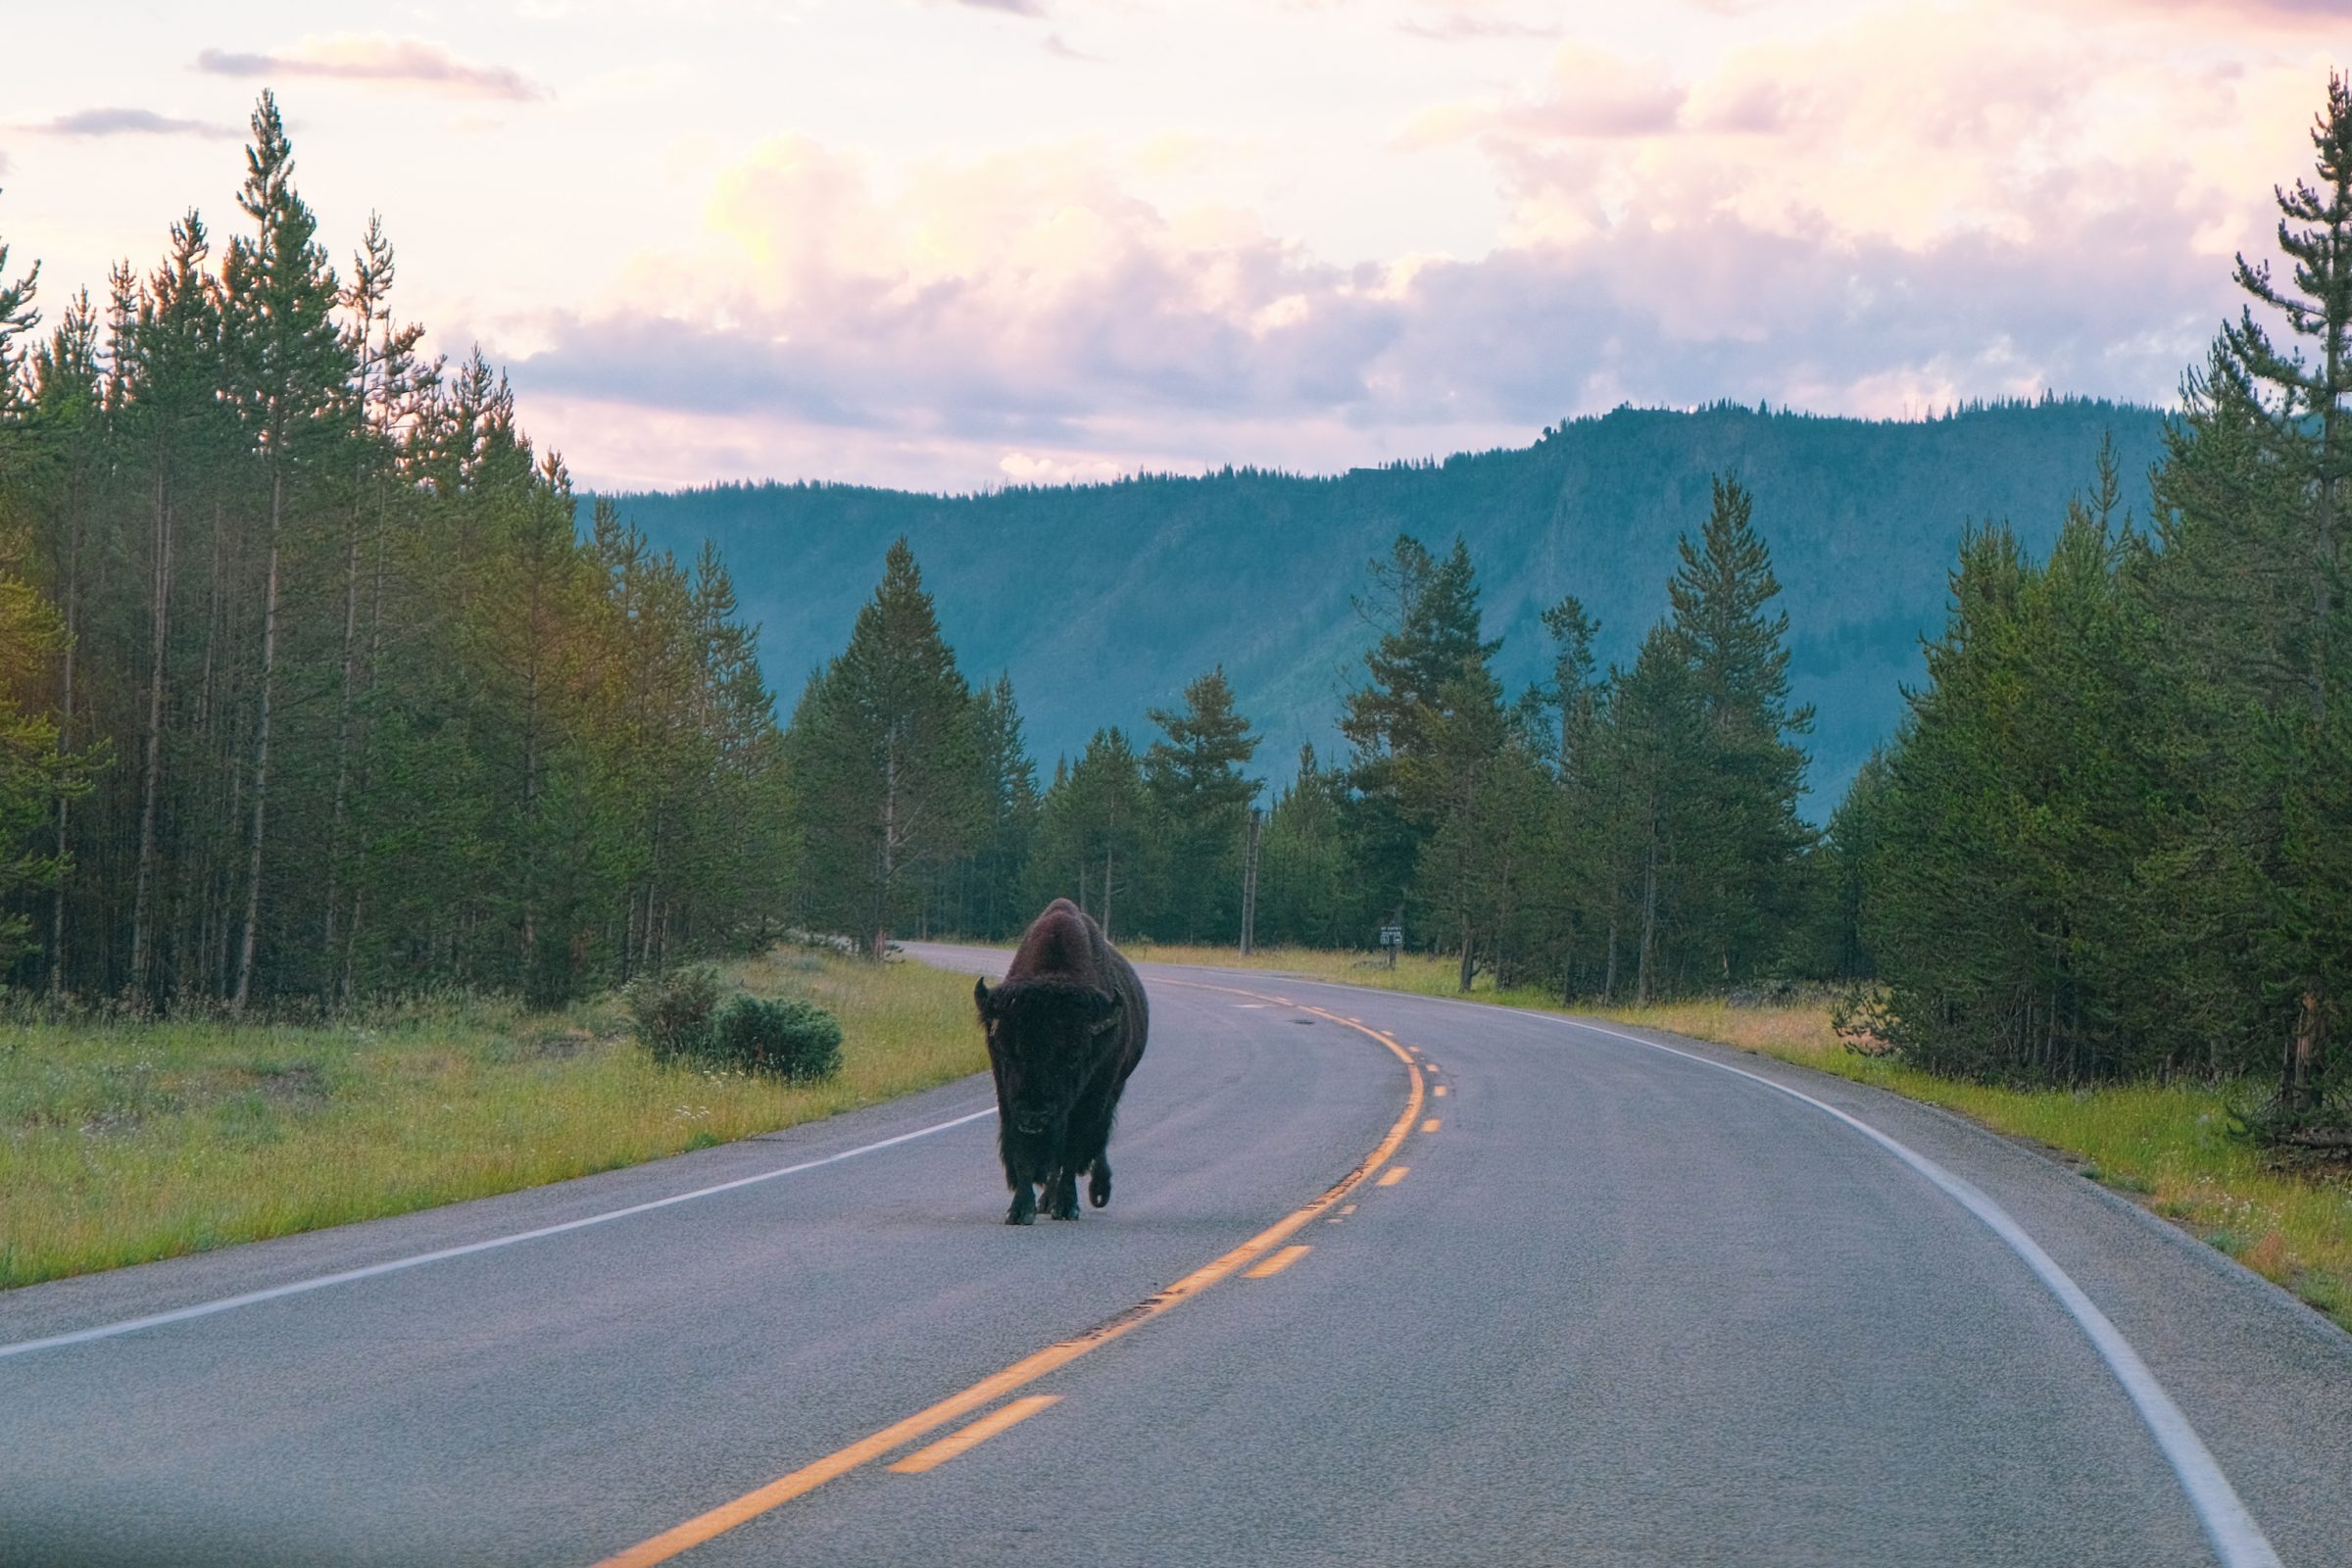 A buffalo on the road in Yellowstone National Park